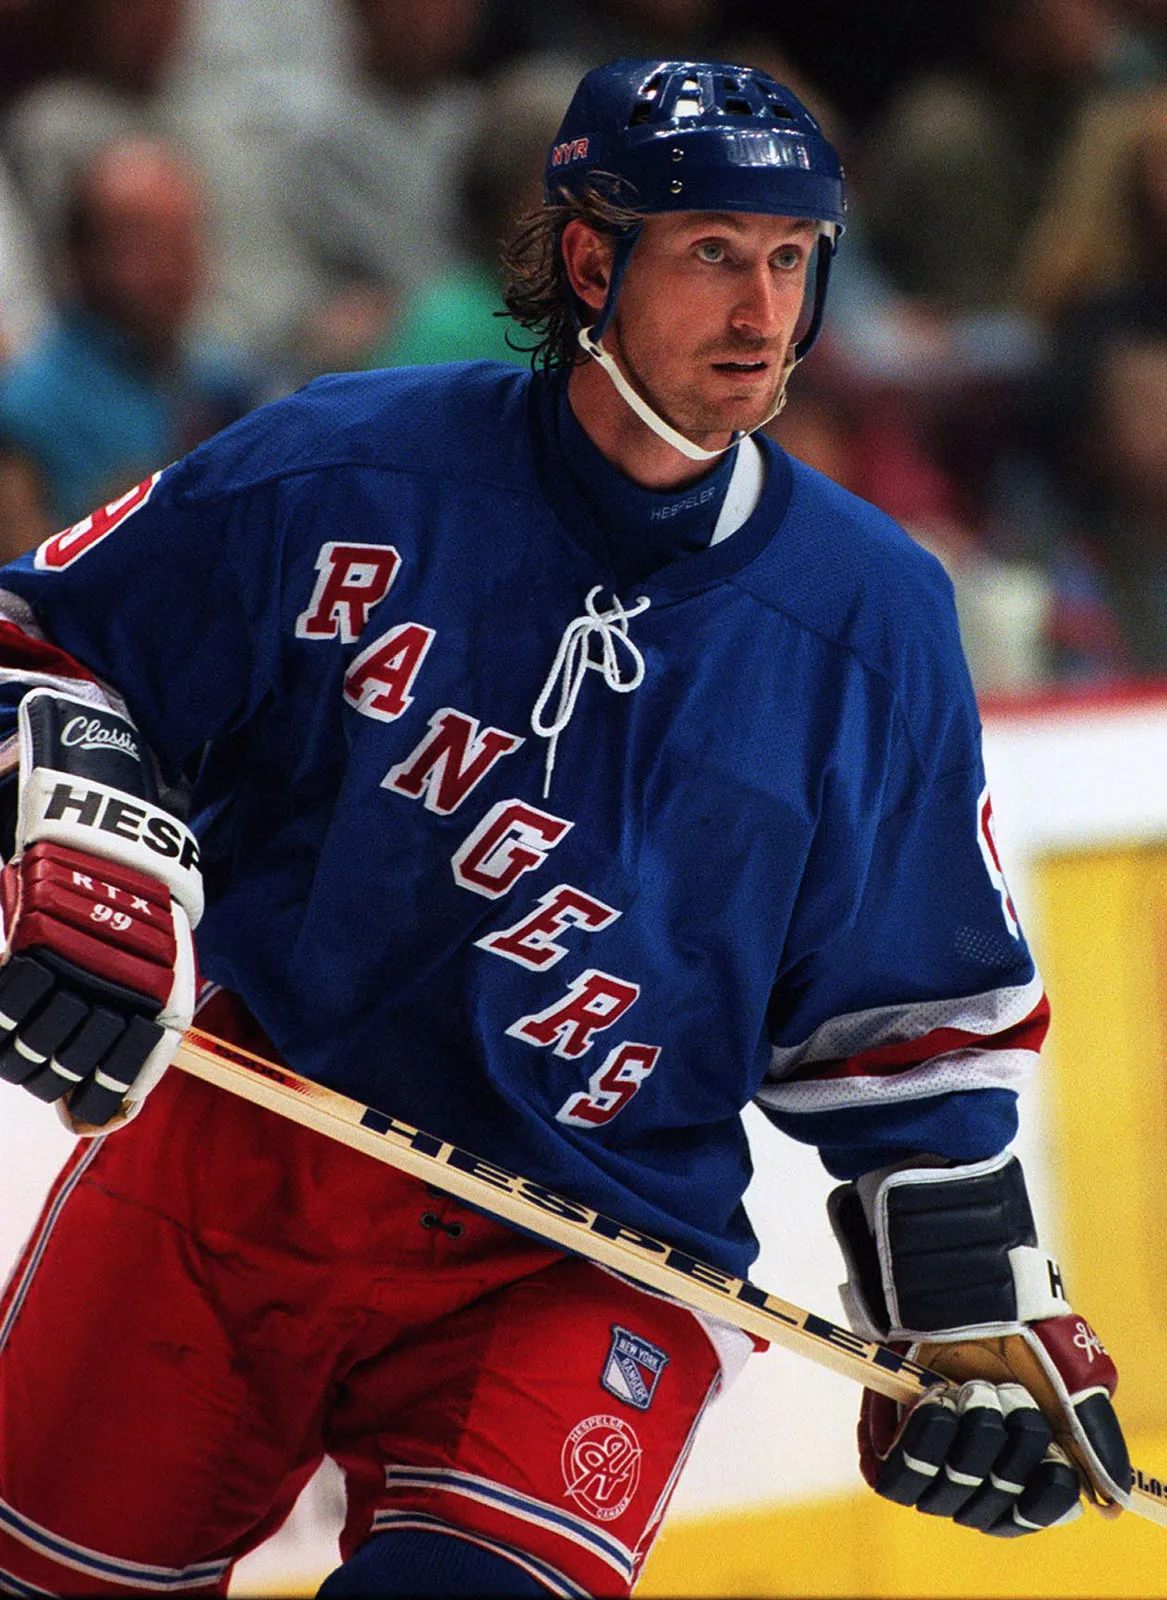 What is Wayne Gretzky's career points total?